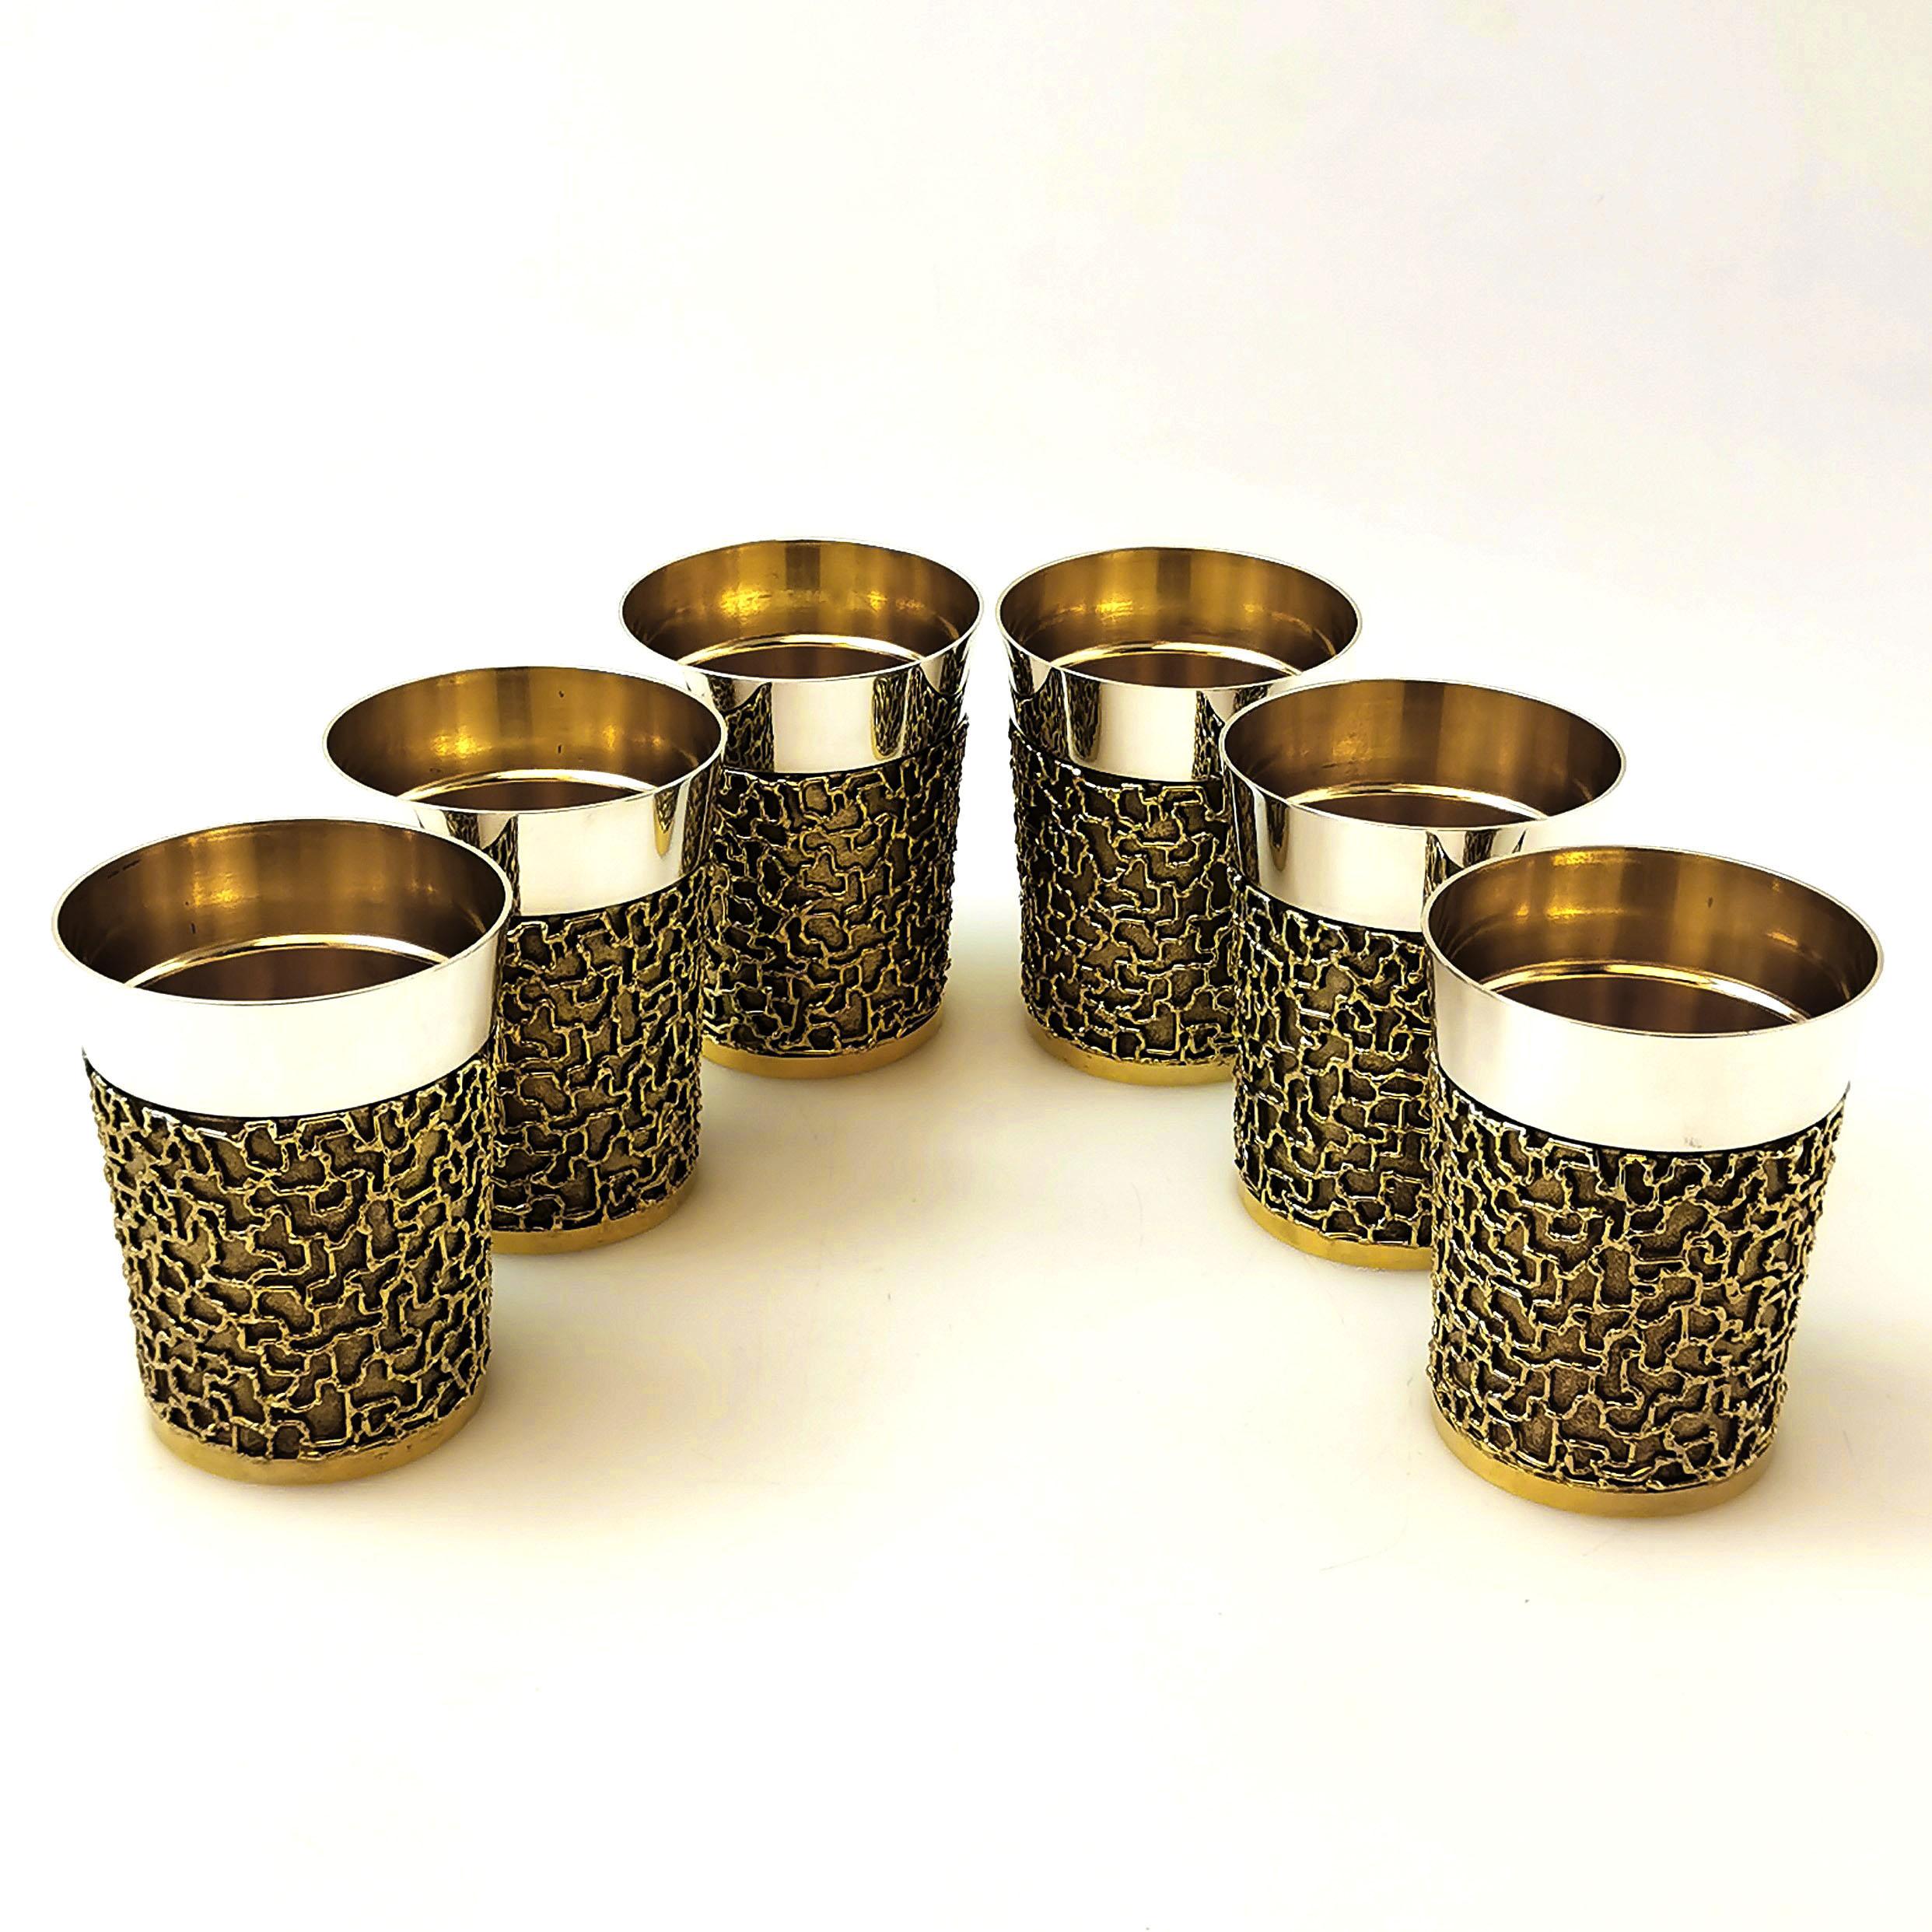 A magnificent Set of 6 solid Silver Beakers with a parcel-gilt finish made by the renowned silversmith Stuart Devlin. The exterior of the Cups has a plain solid silver band around the top and the rest of the body has a textured gilt base with a